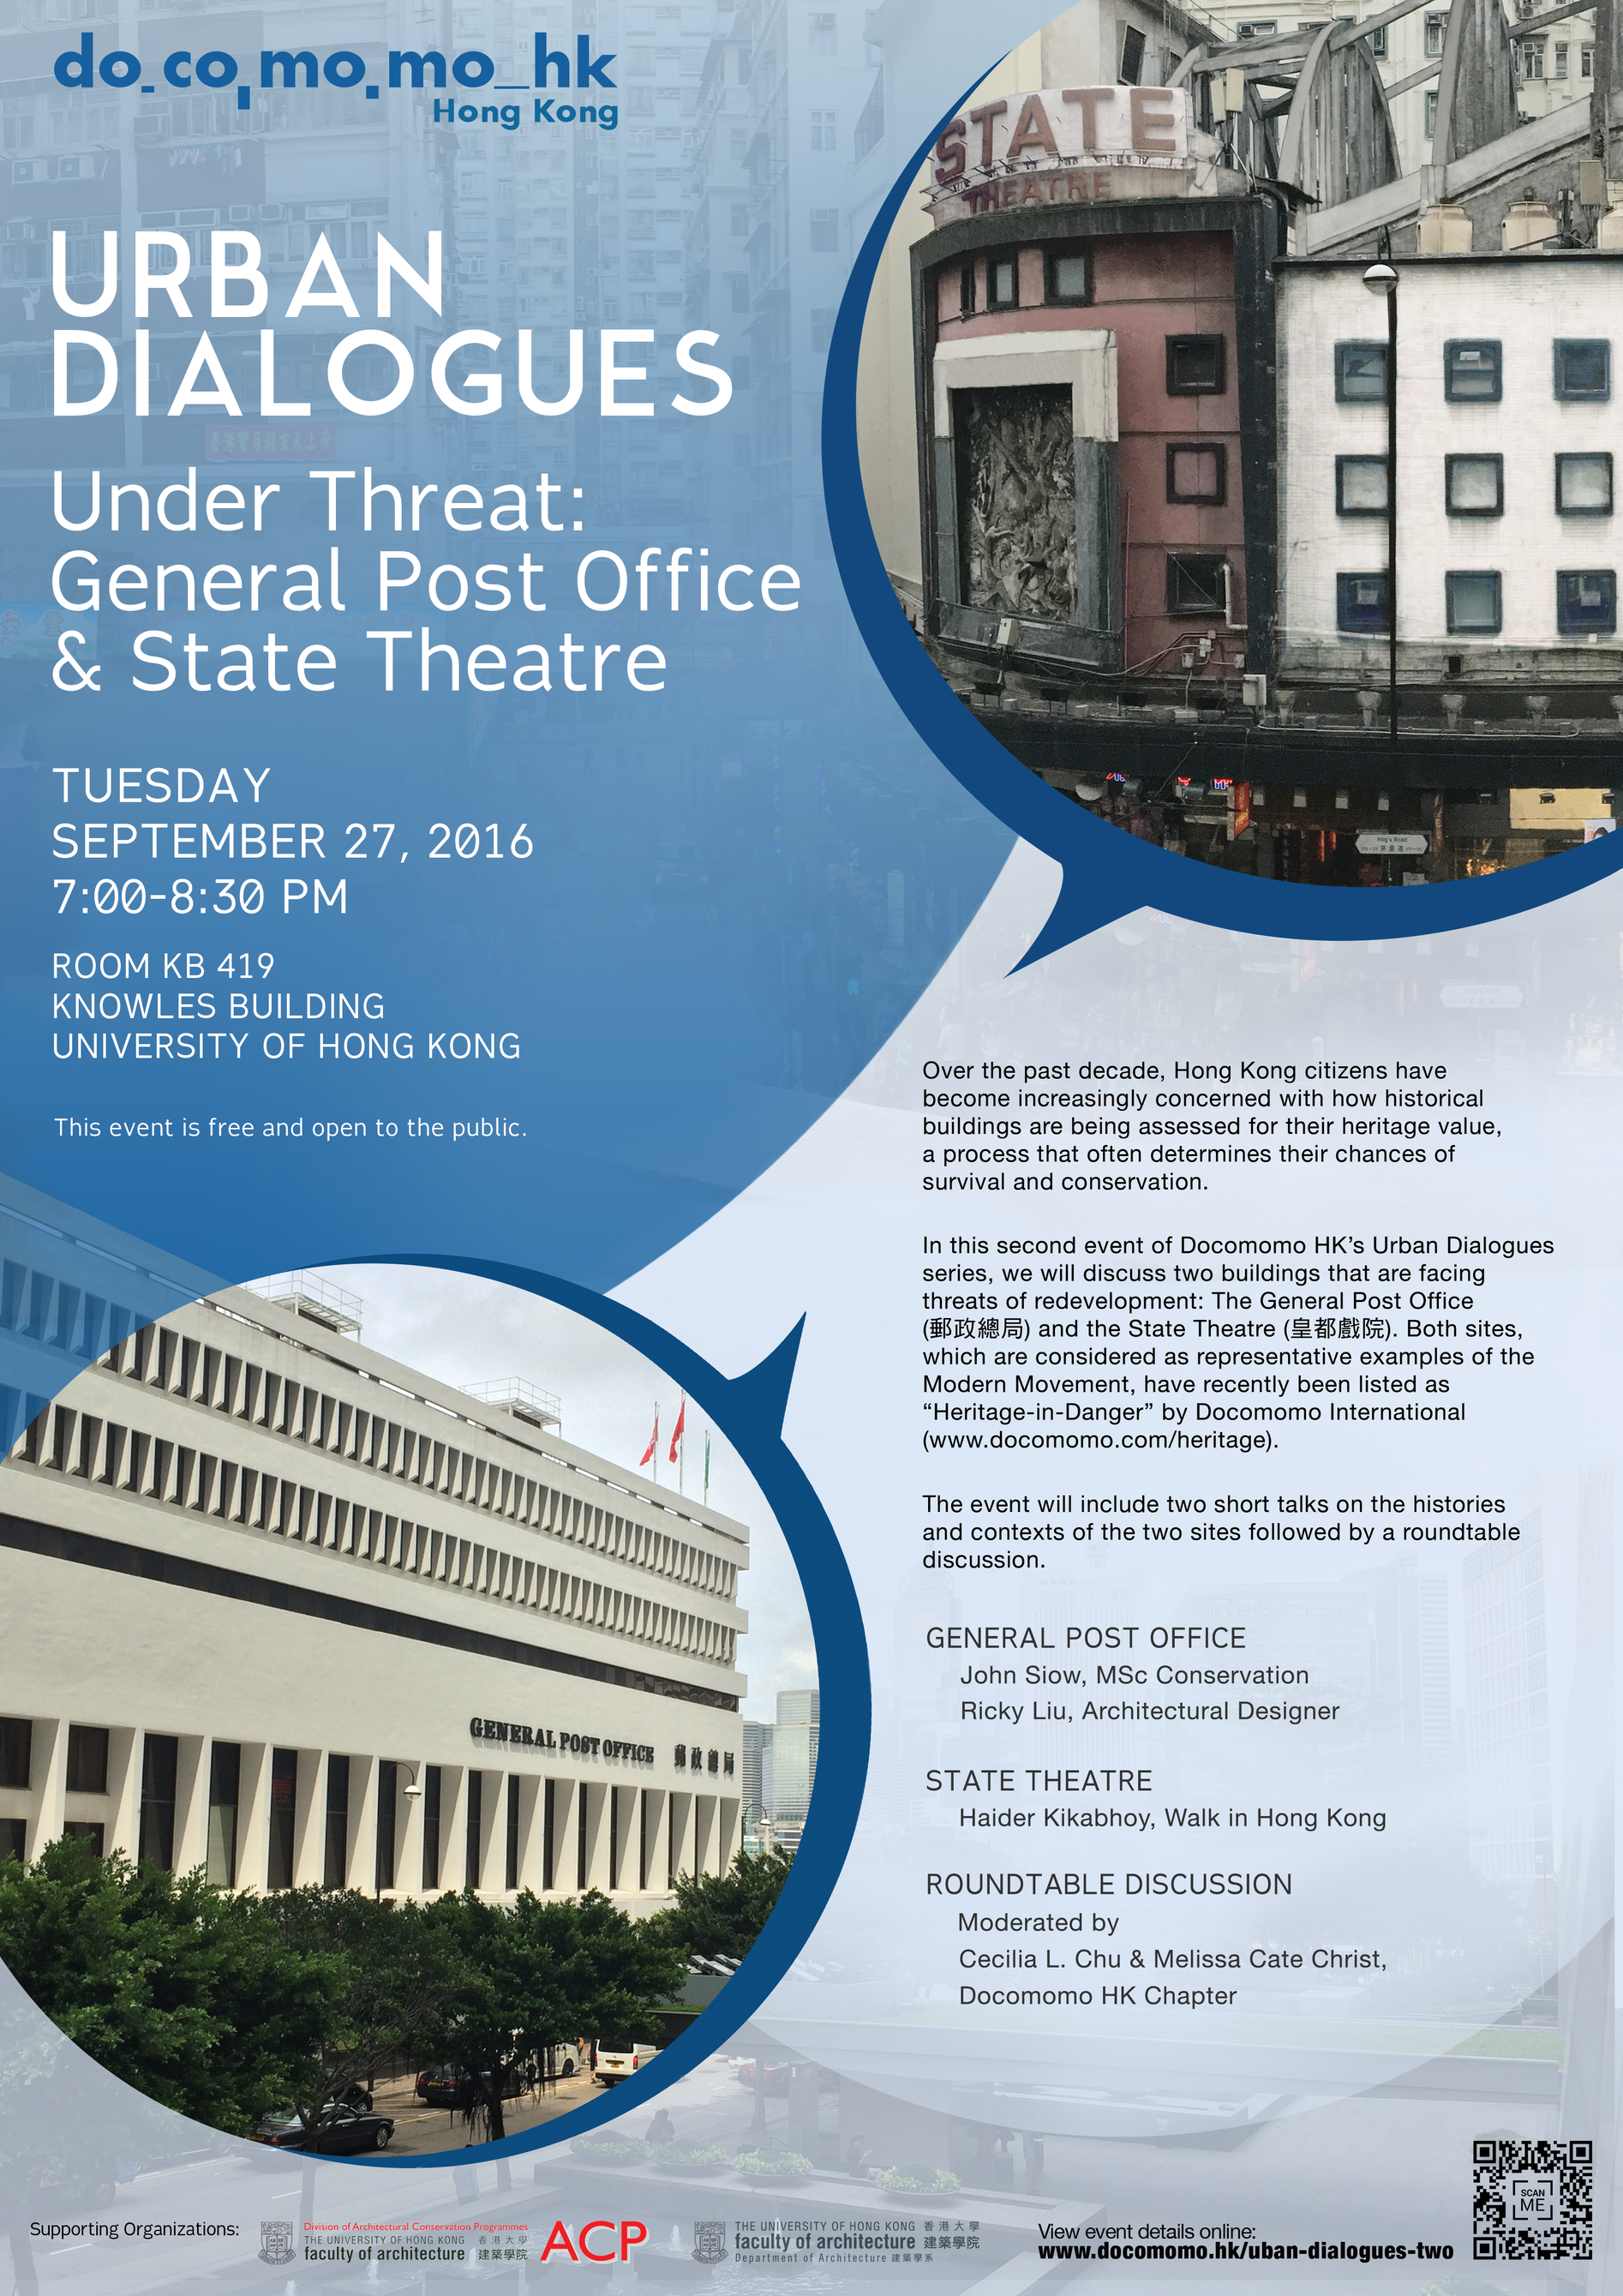 Urban Dialogues: Under Threat - General Post Office & State Theatre